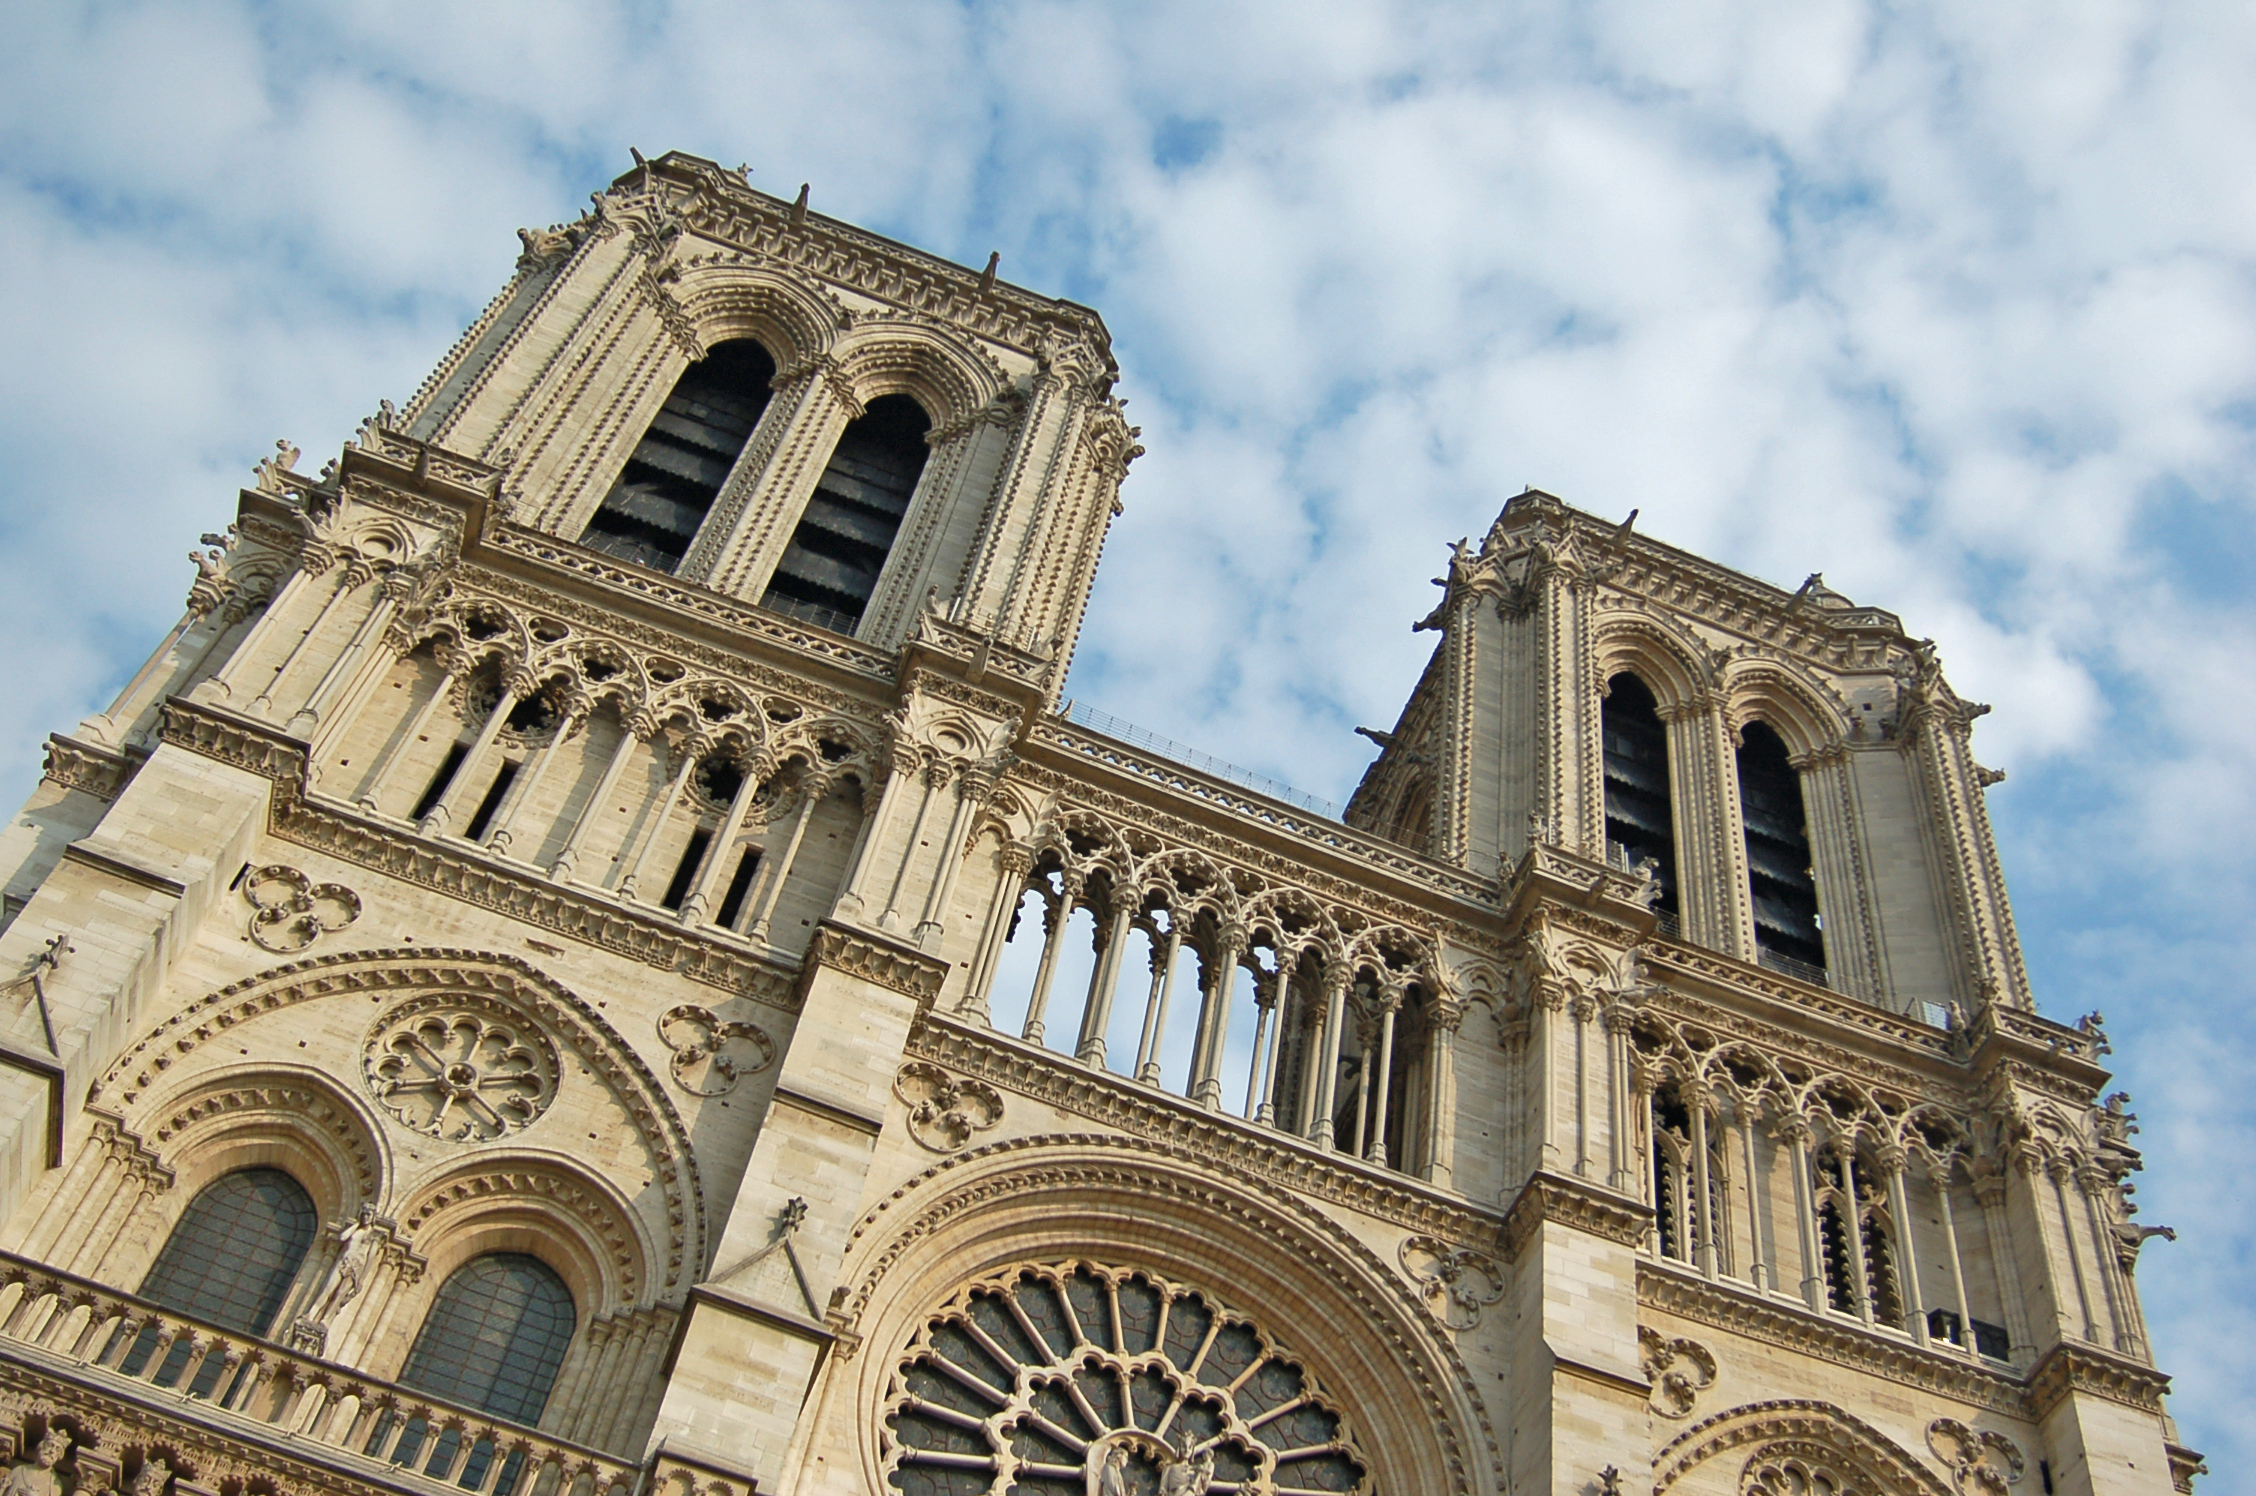 A view of the main structure and two front towers of Notre-Dame de Paris.